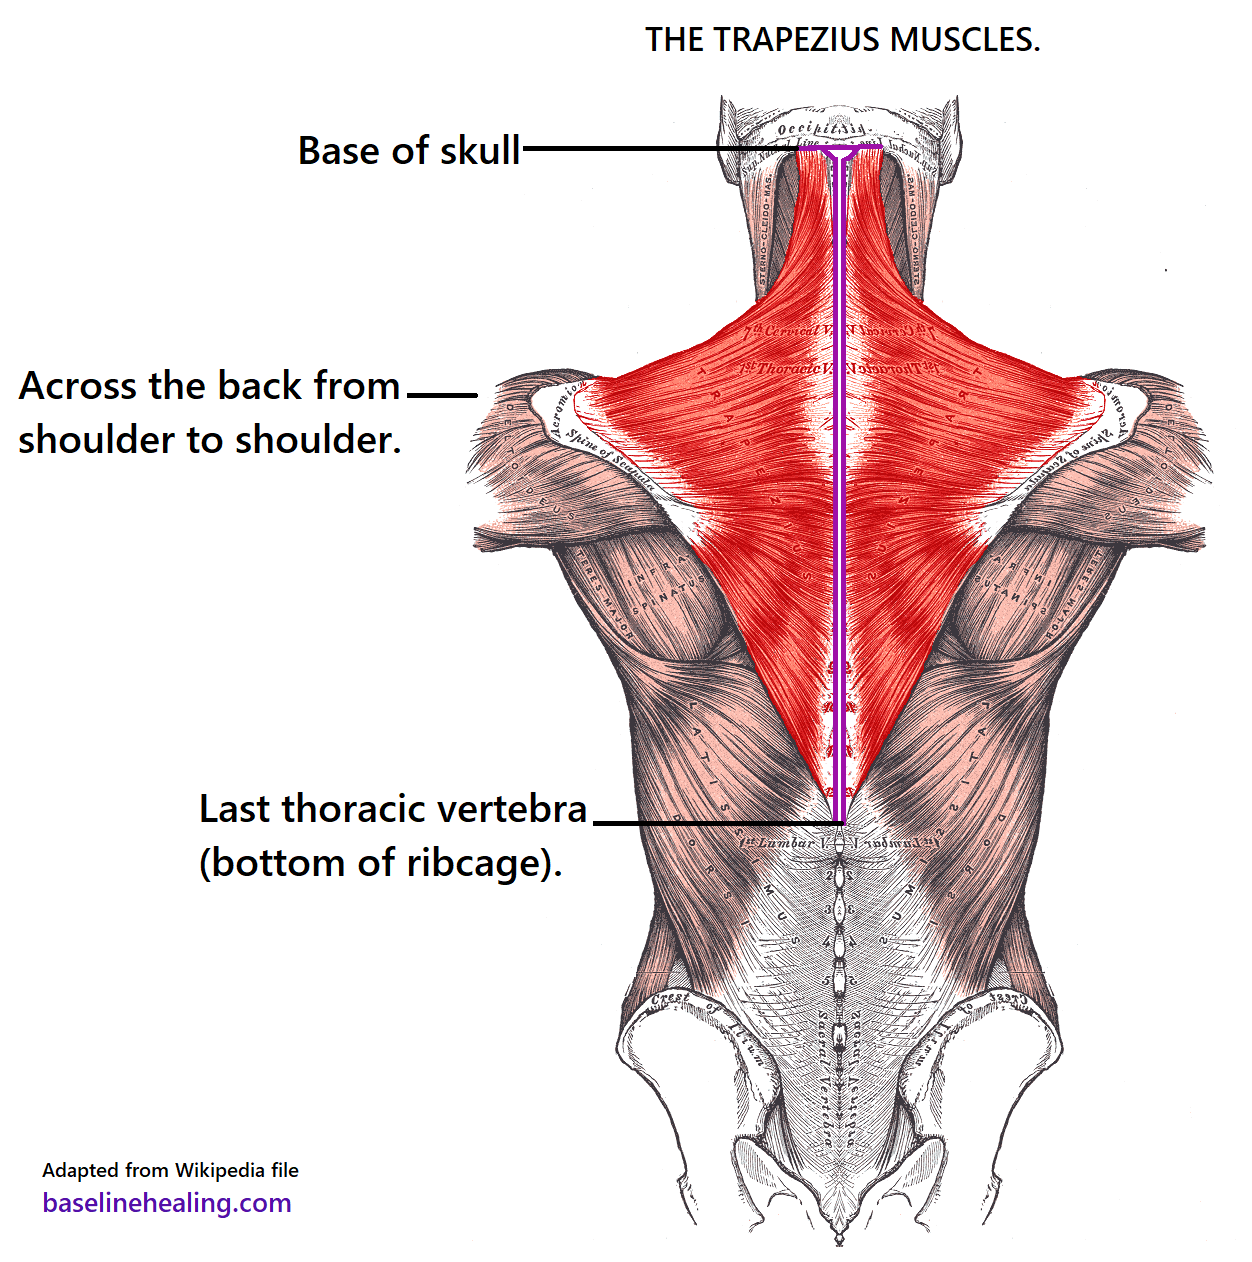 The trapezius muscles seen from behind. A kite-shape lying over the ribs, upper back, shoulders and neck. Starting as a point, midline at the level of the bottom ribs, each trapezius extends up and outwards, towards the shoulders forming a triangle. This is the lower trapezius muscles. The widest part of the trapezii is across the bottom of the neck, level with the shoulders. This is the middle trapezius, where the muscle fibres lie horizontal. The trapezii become narrower towards the head, curved as the upper trapezius forms the back and sides of the neck. The trapezius muscles should be free to move without pain or tension, supporting the head and arms through a full range of natural movement.